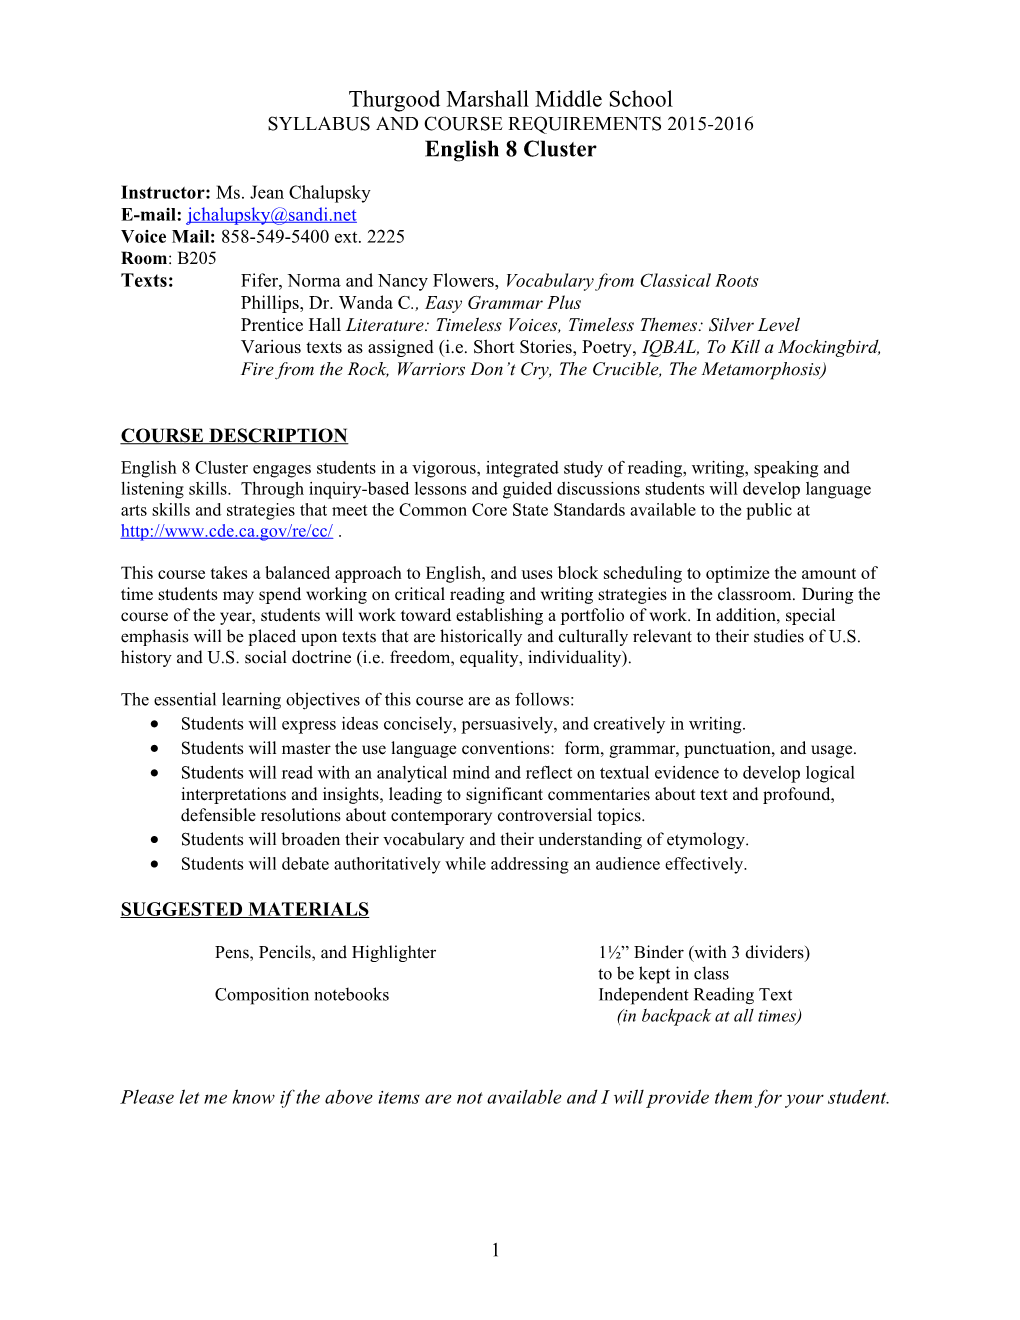 Syllabus and Course Requirements 2015-2016